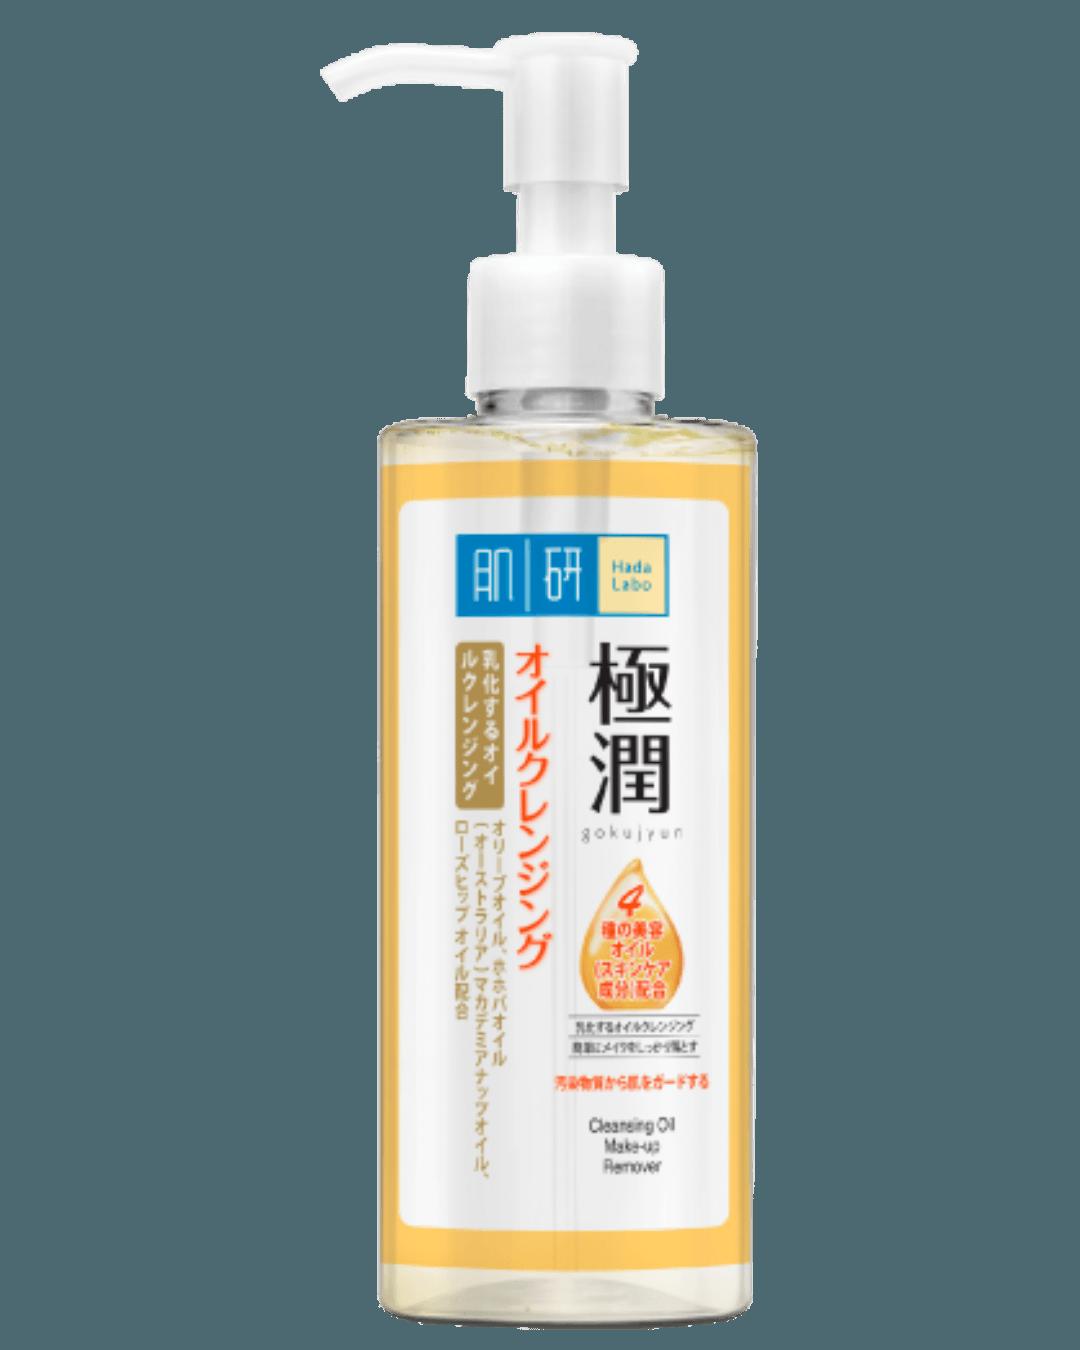 Daily Vanity Beauty Awards 2024 Best Make up Hada Labo SHA Cleansing Oil Voted By Beauty Experts